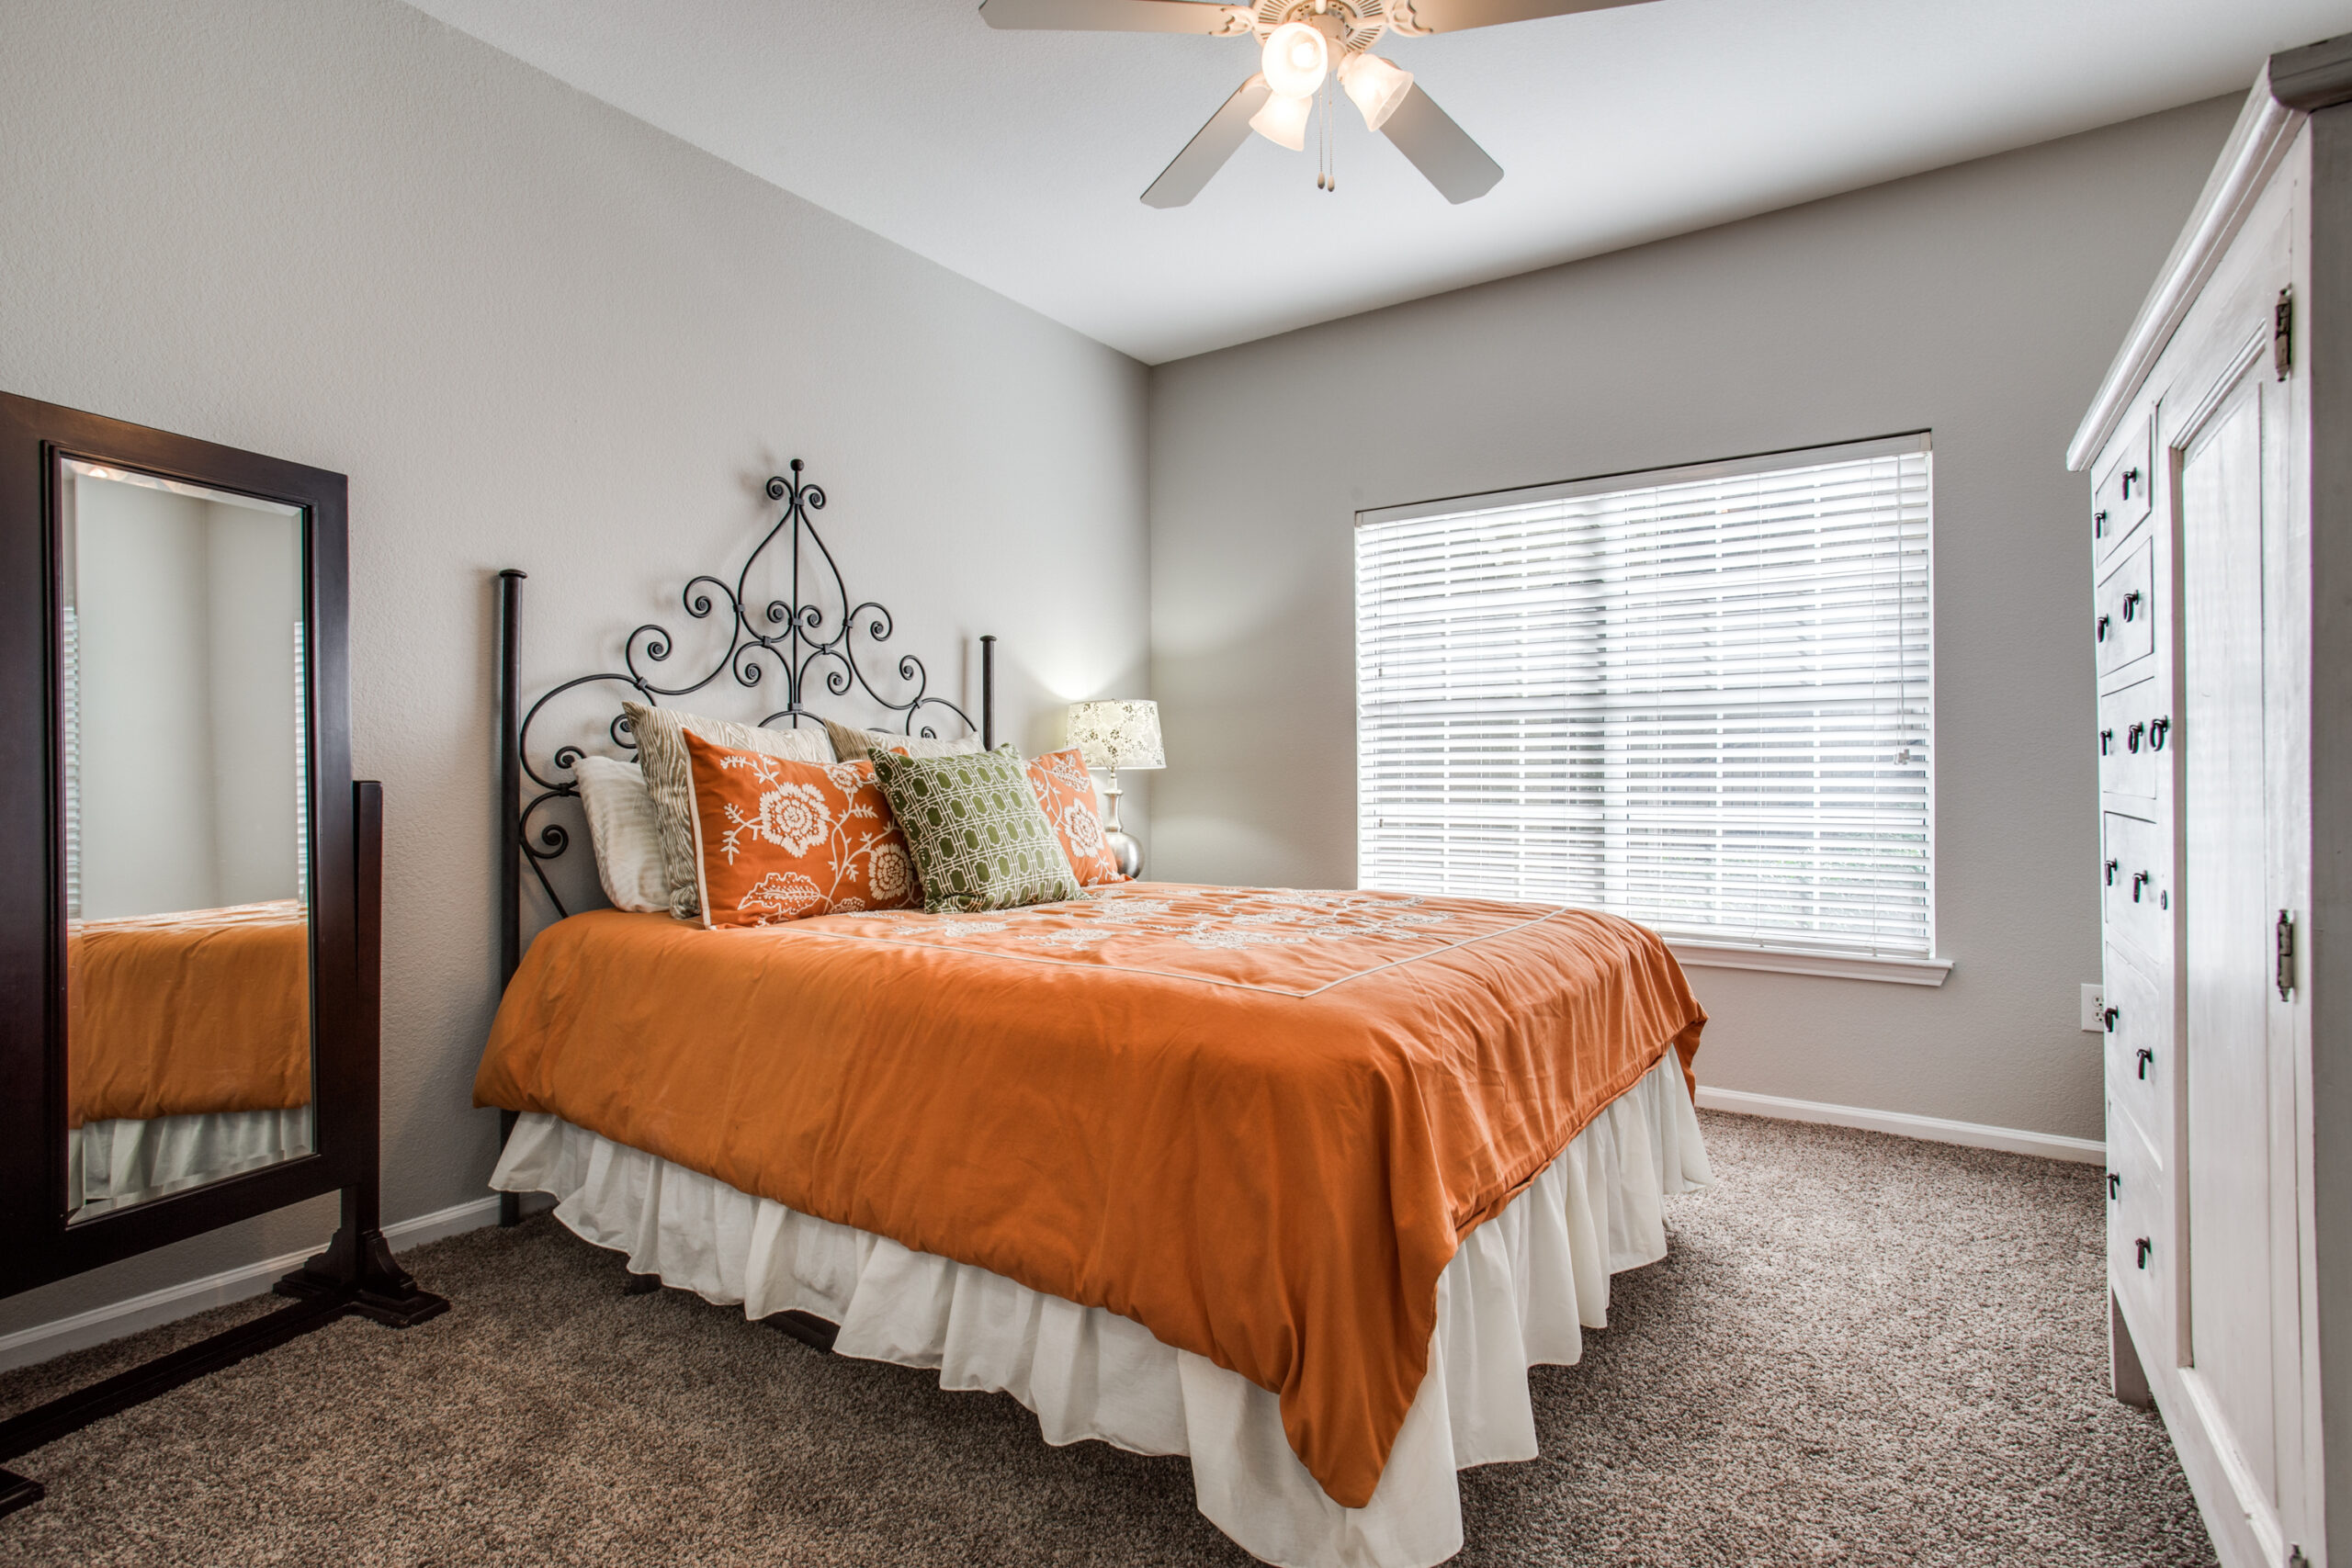 model bedroom with orange theme color, carpeted floors and ceiling fan